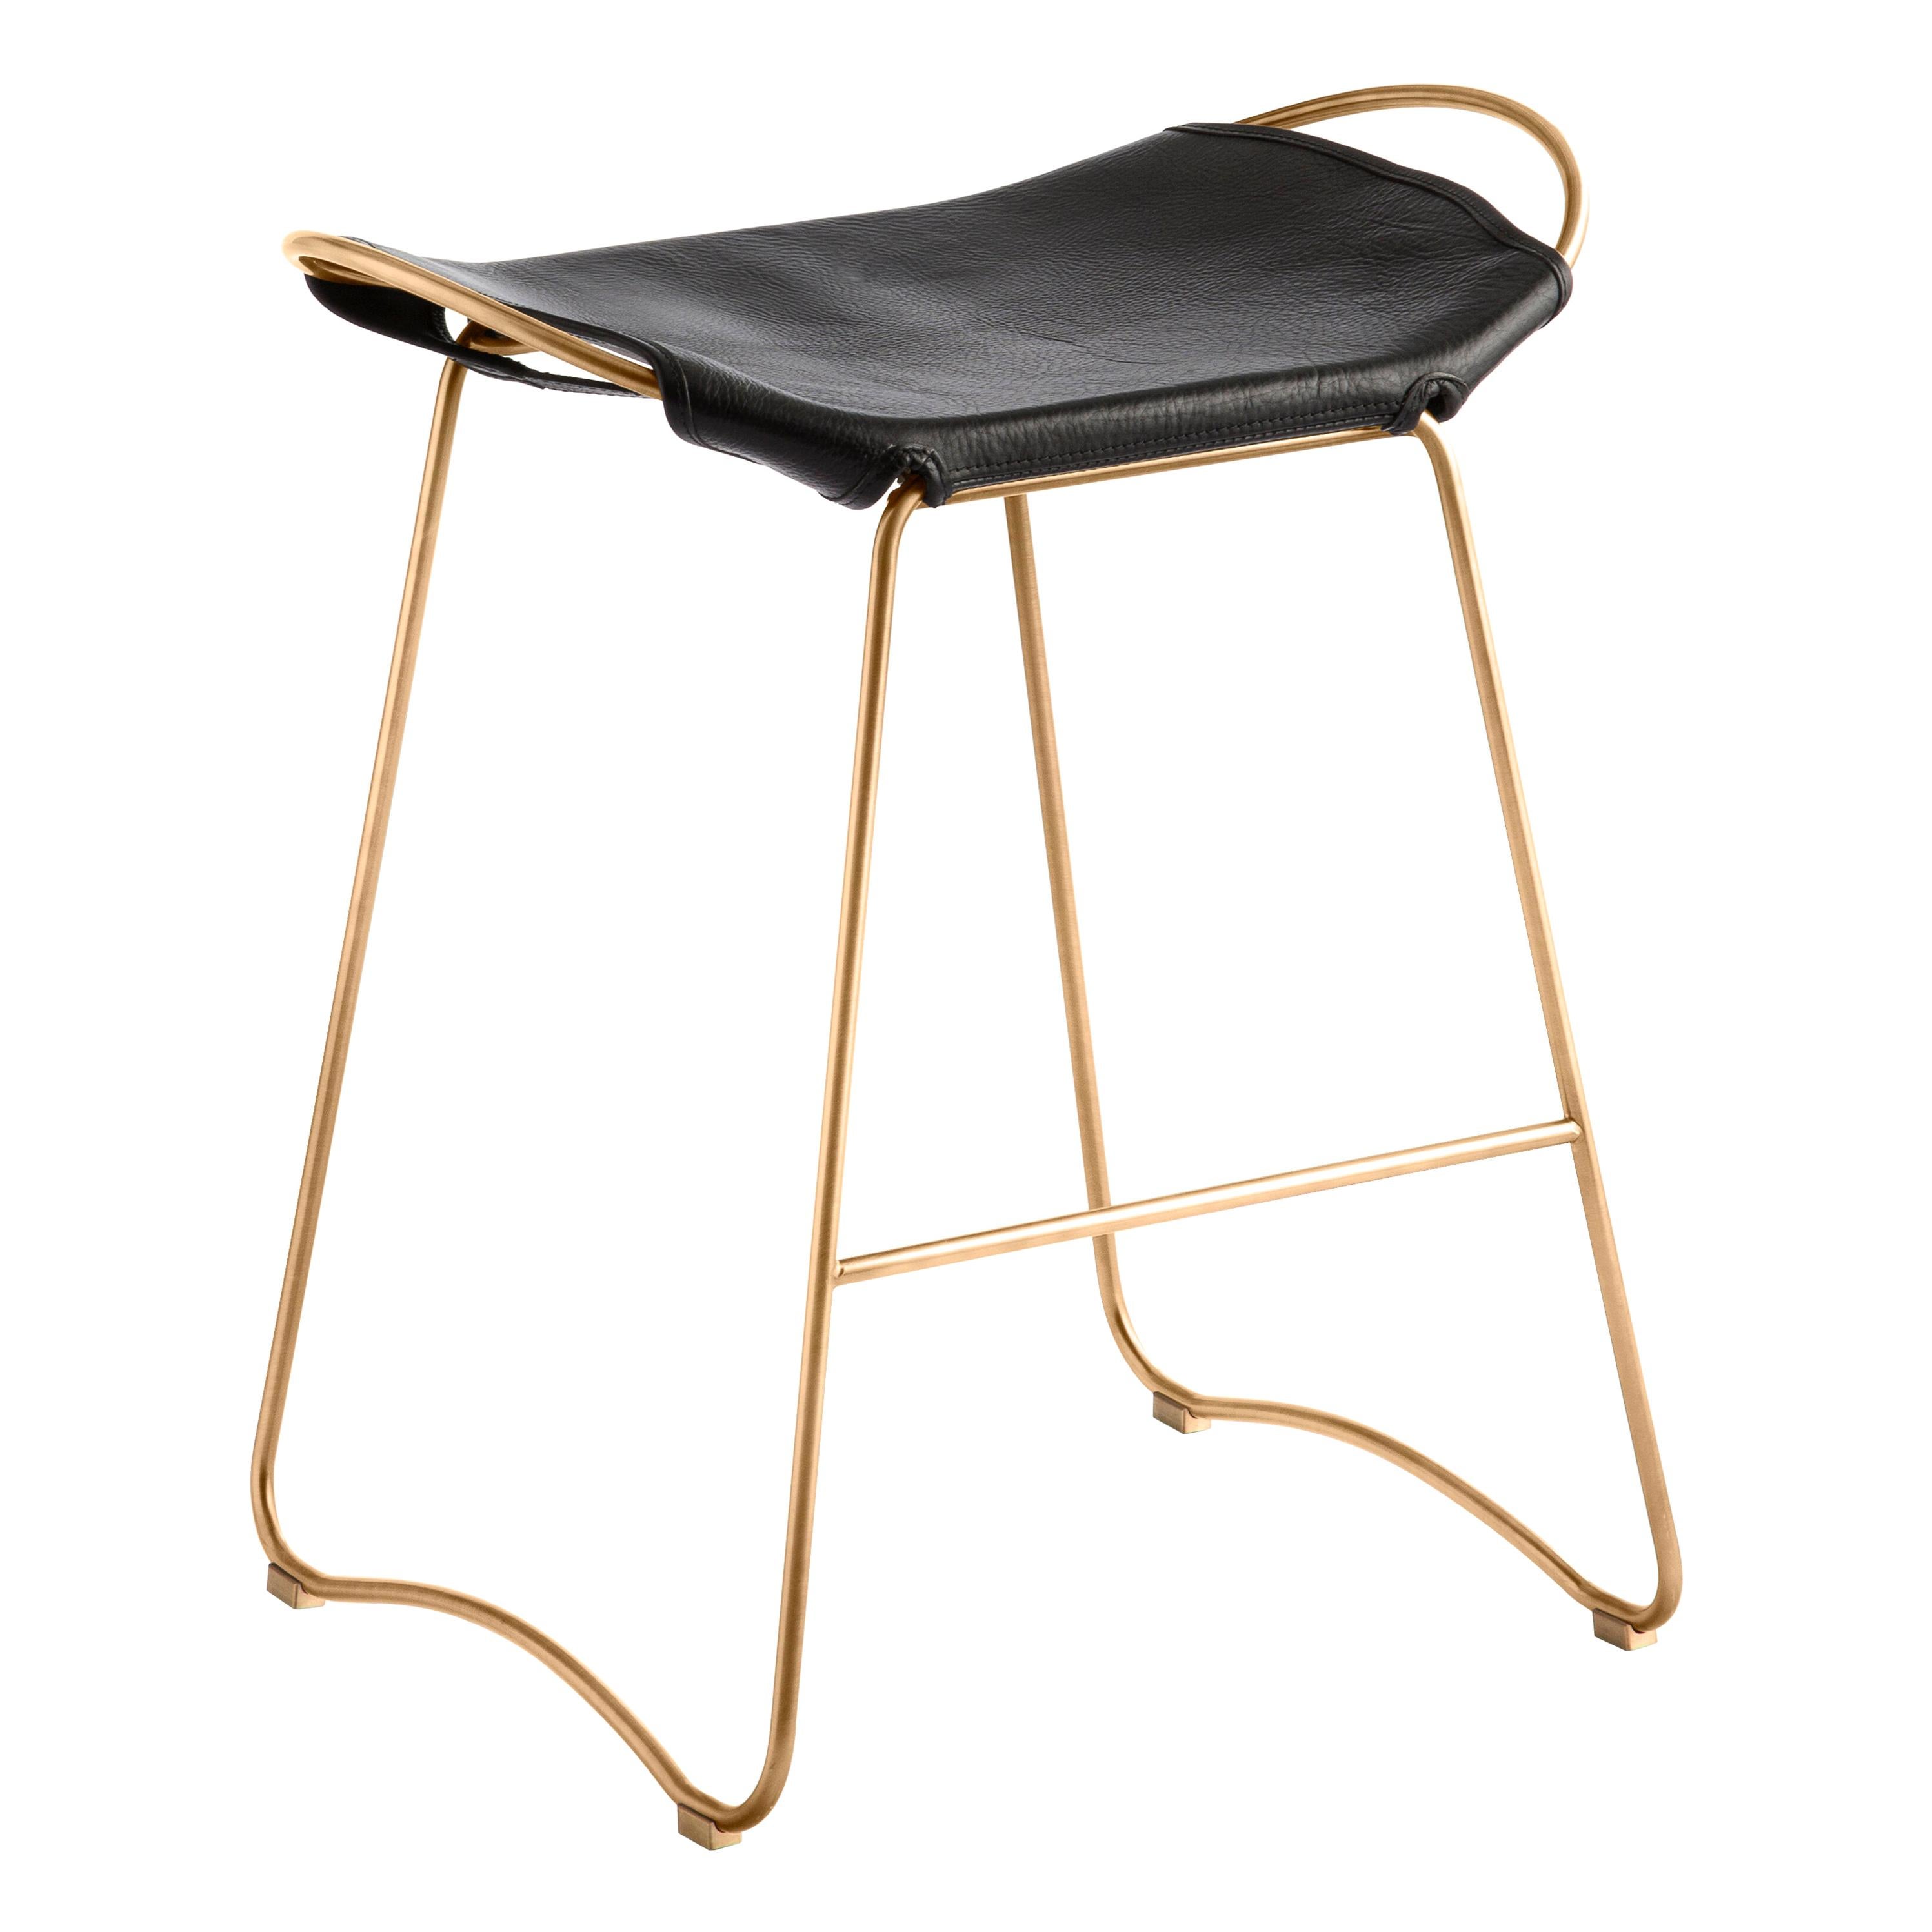 Contemporary Sculptural Bar Stool, Aged Brass Metal & Black Leather